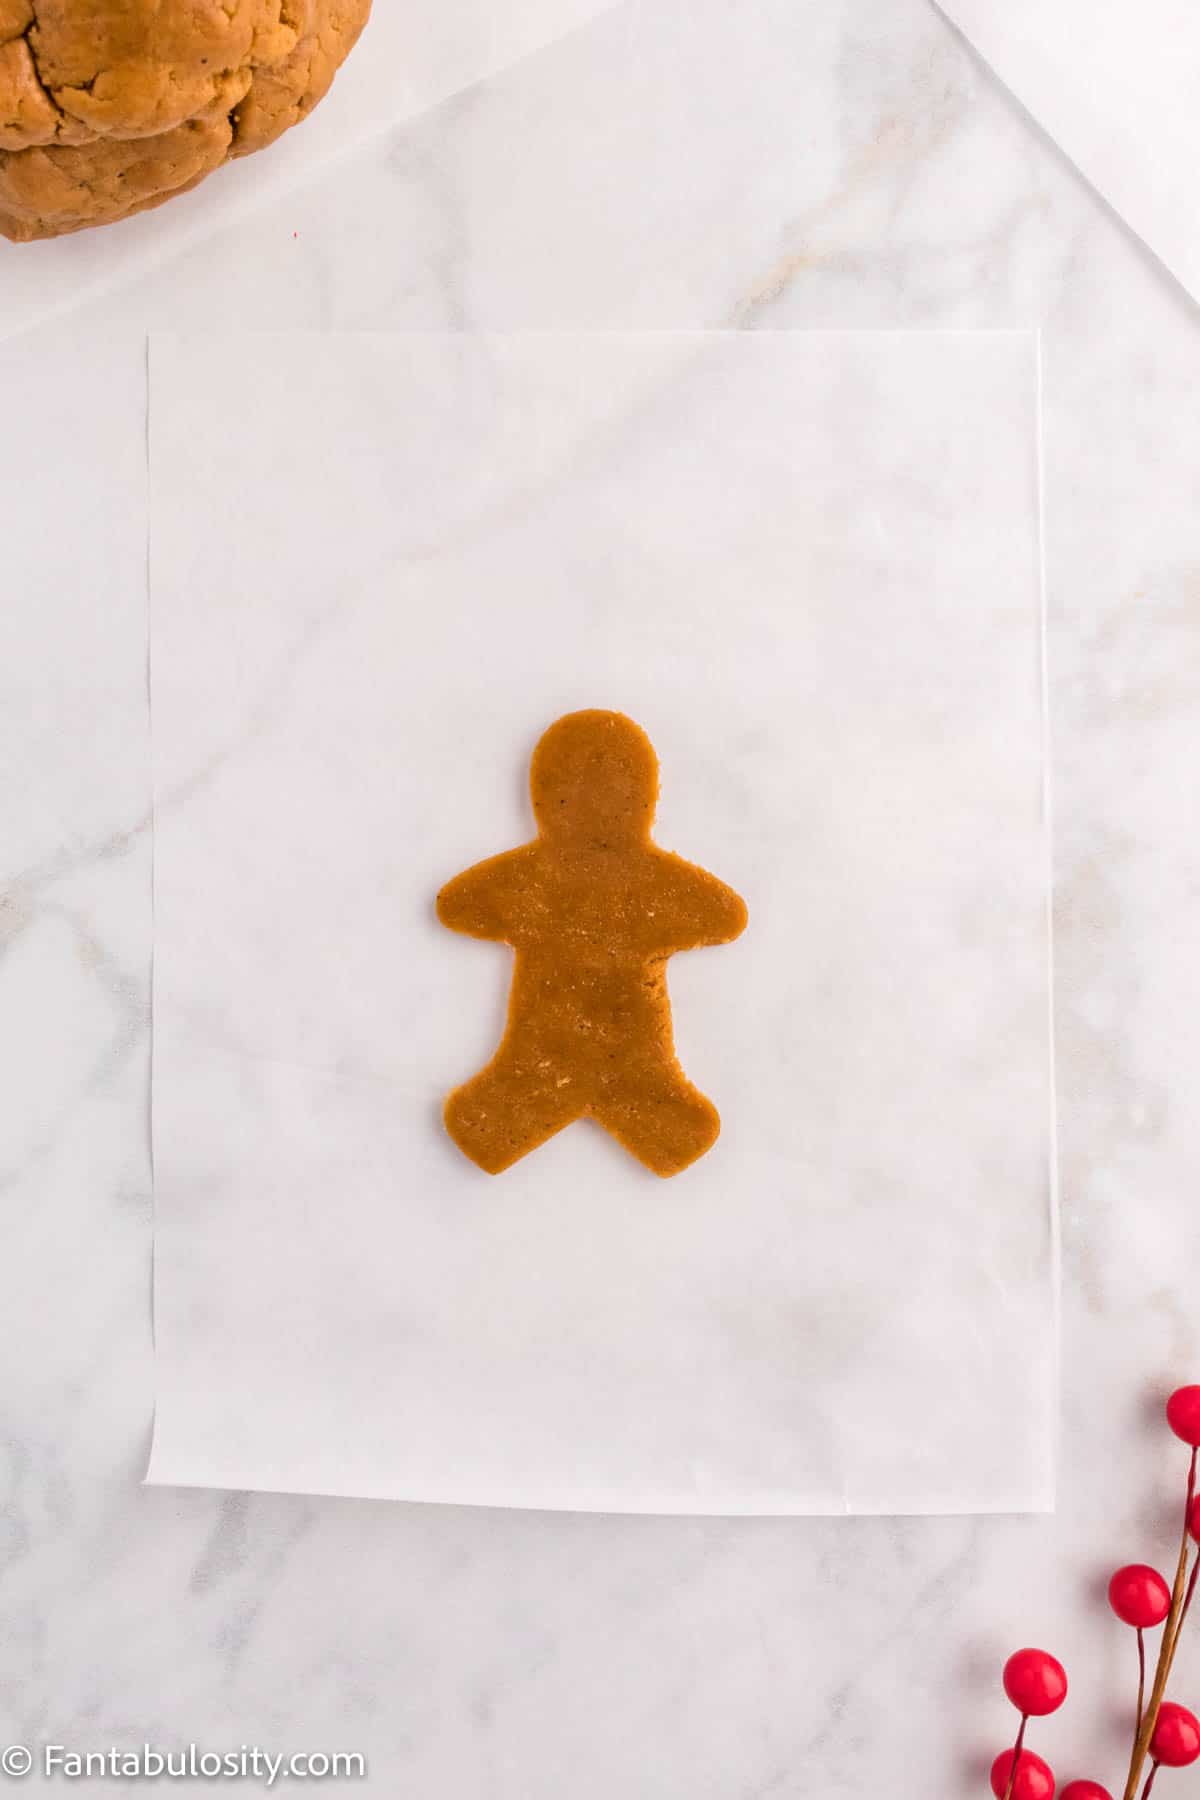 Deep brown cookie dough has been cut into the shape of a gingerbread man